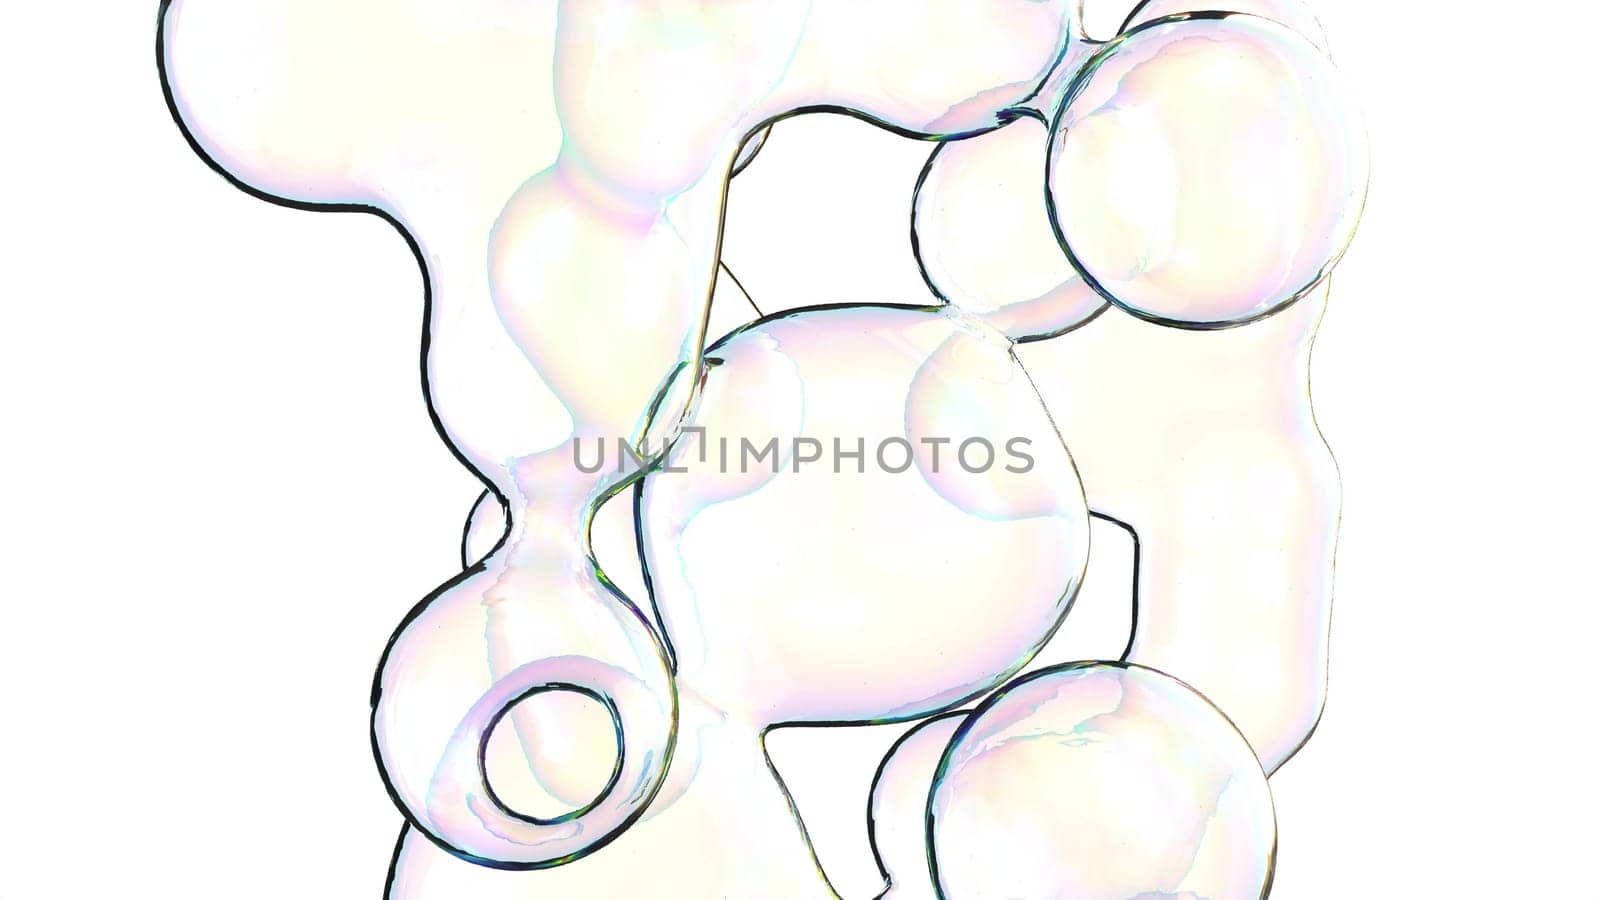 Abstract bubble metaball shapes on white back holographic colors 3d render